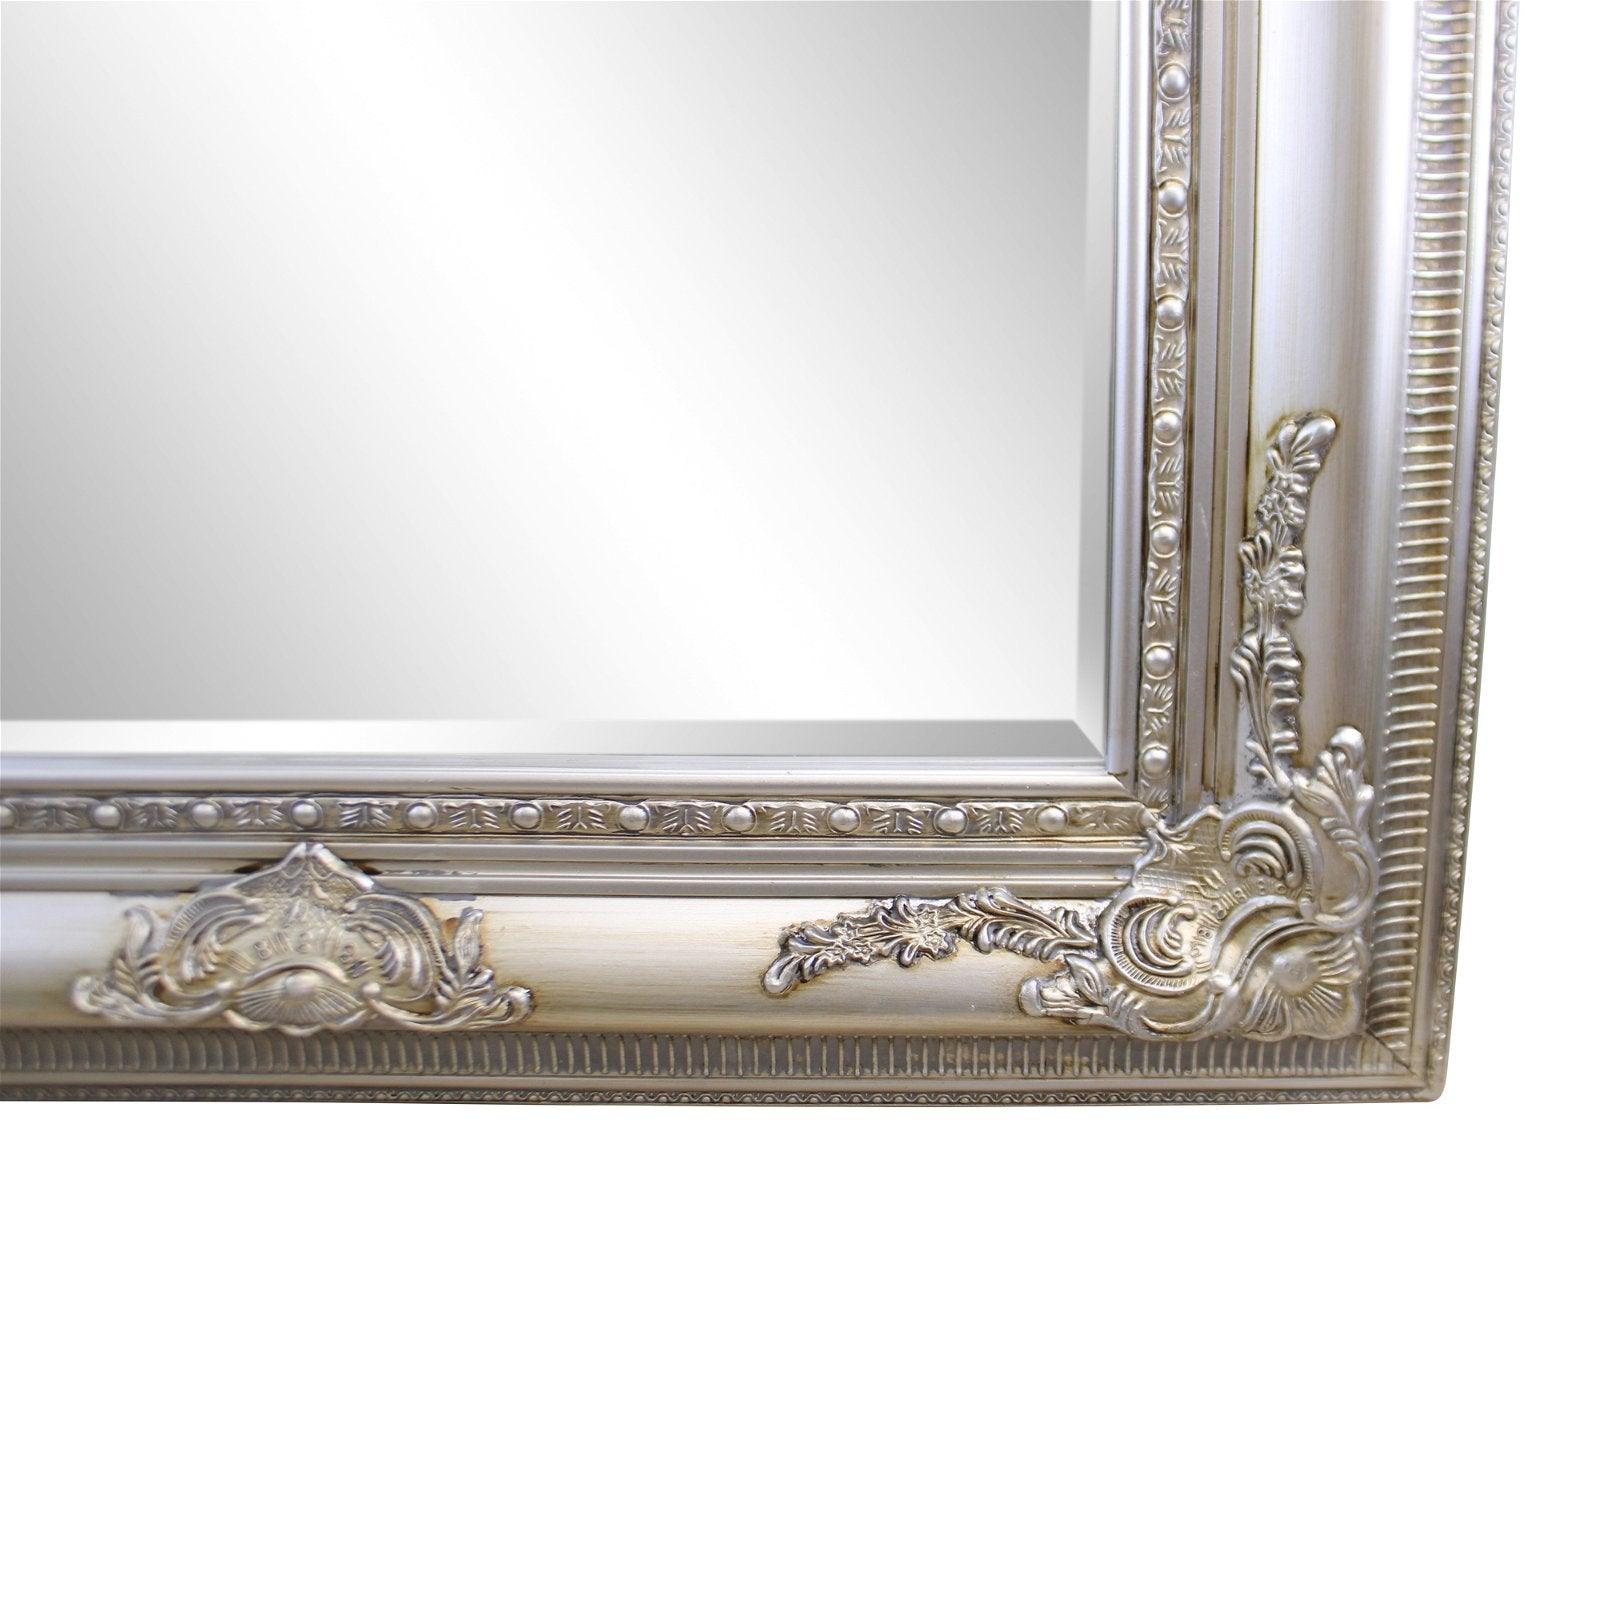 View Ornate Silver Framed Wall Mirror With Bevelled Glass 148x87cm information